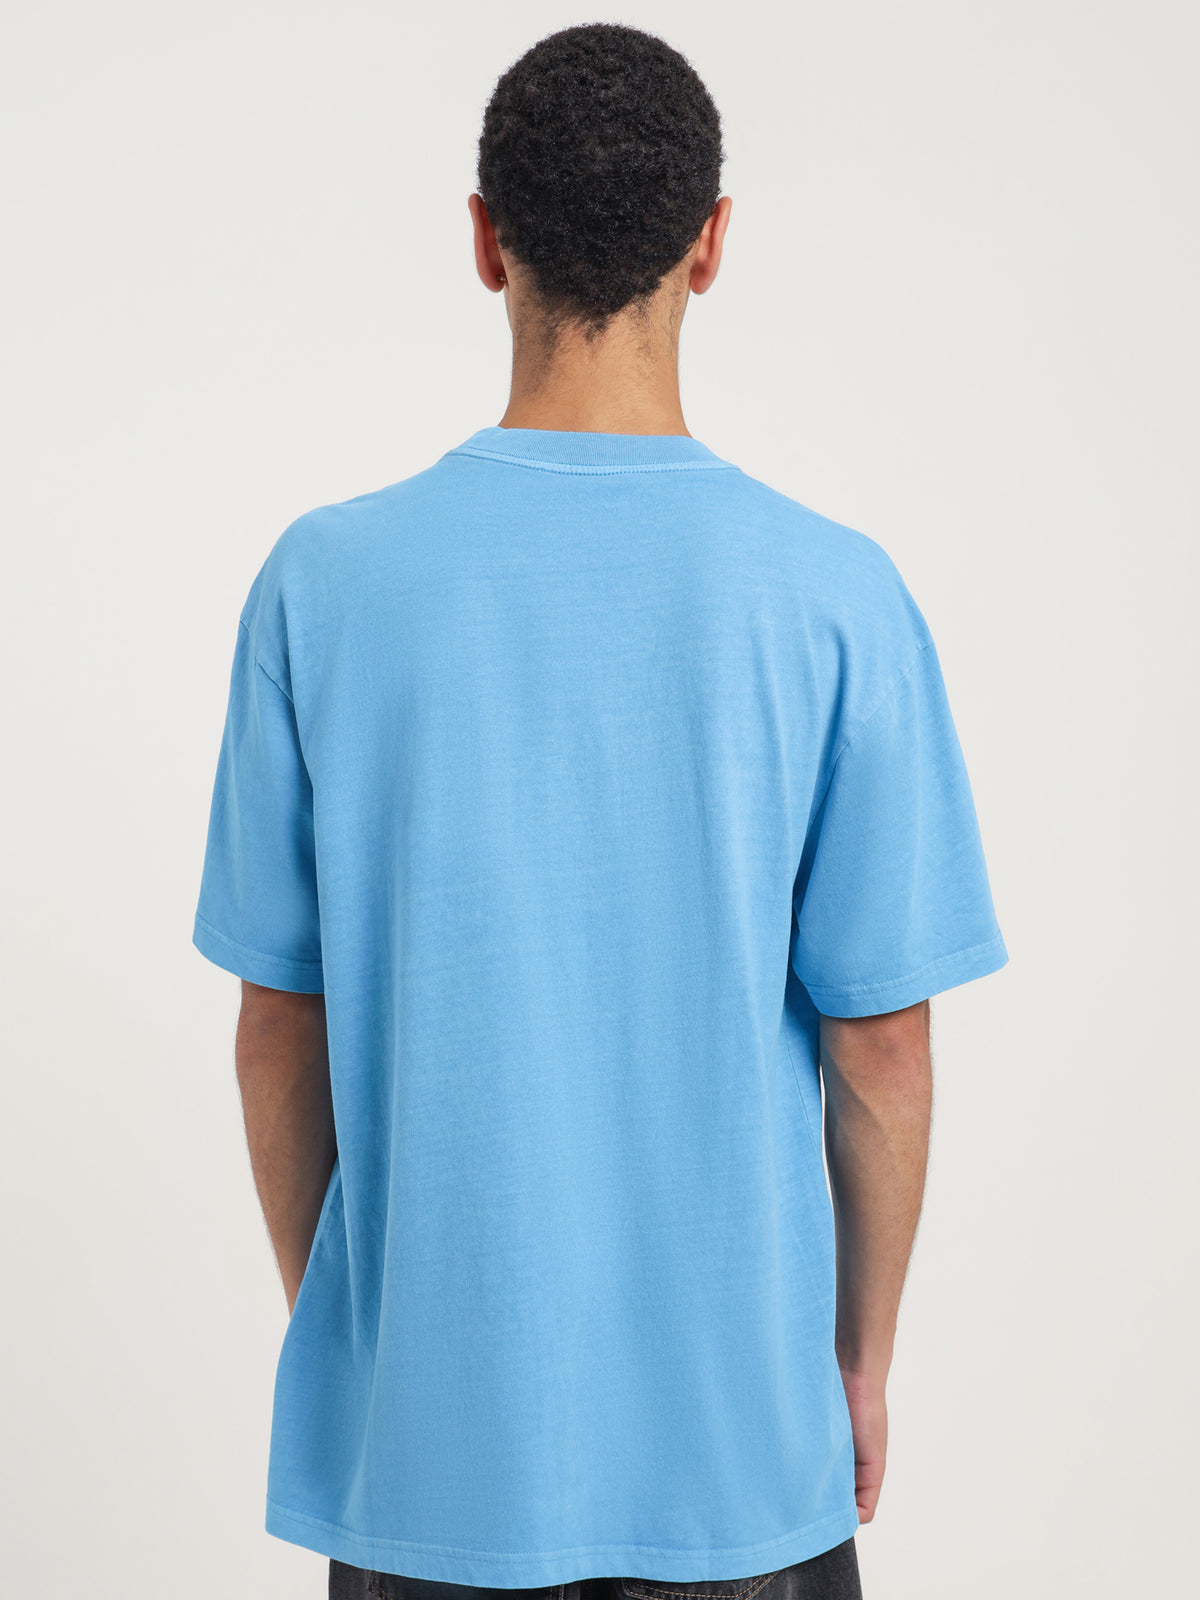 Division Arch T-Shirt in Blue